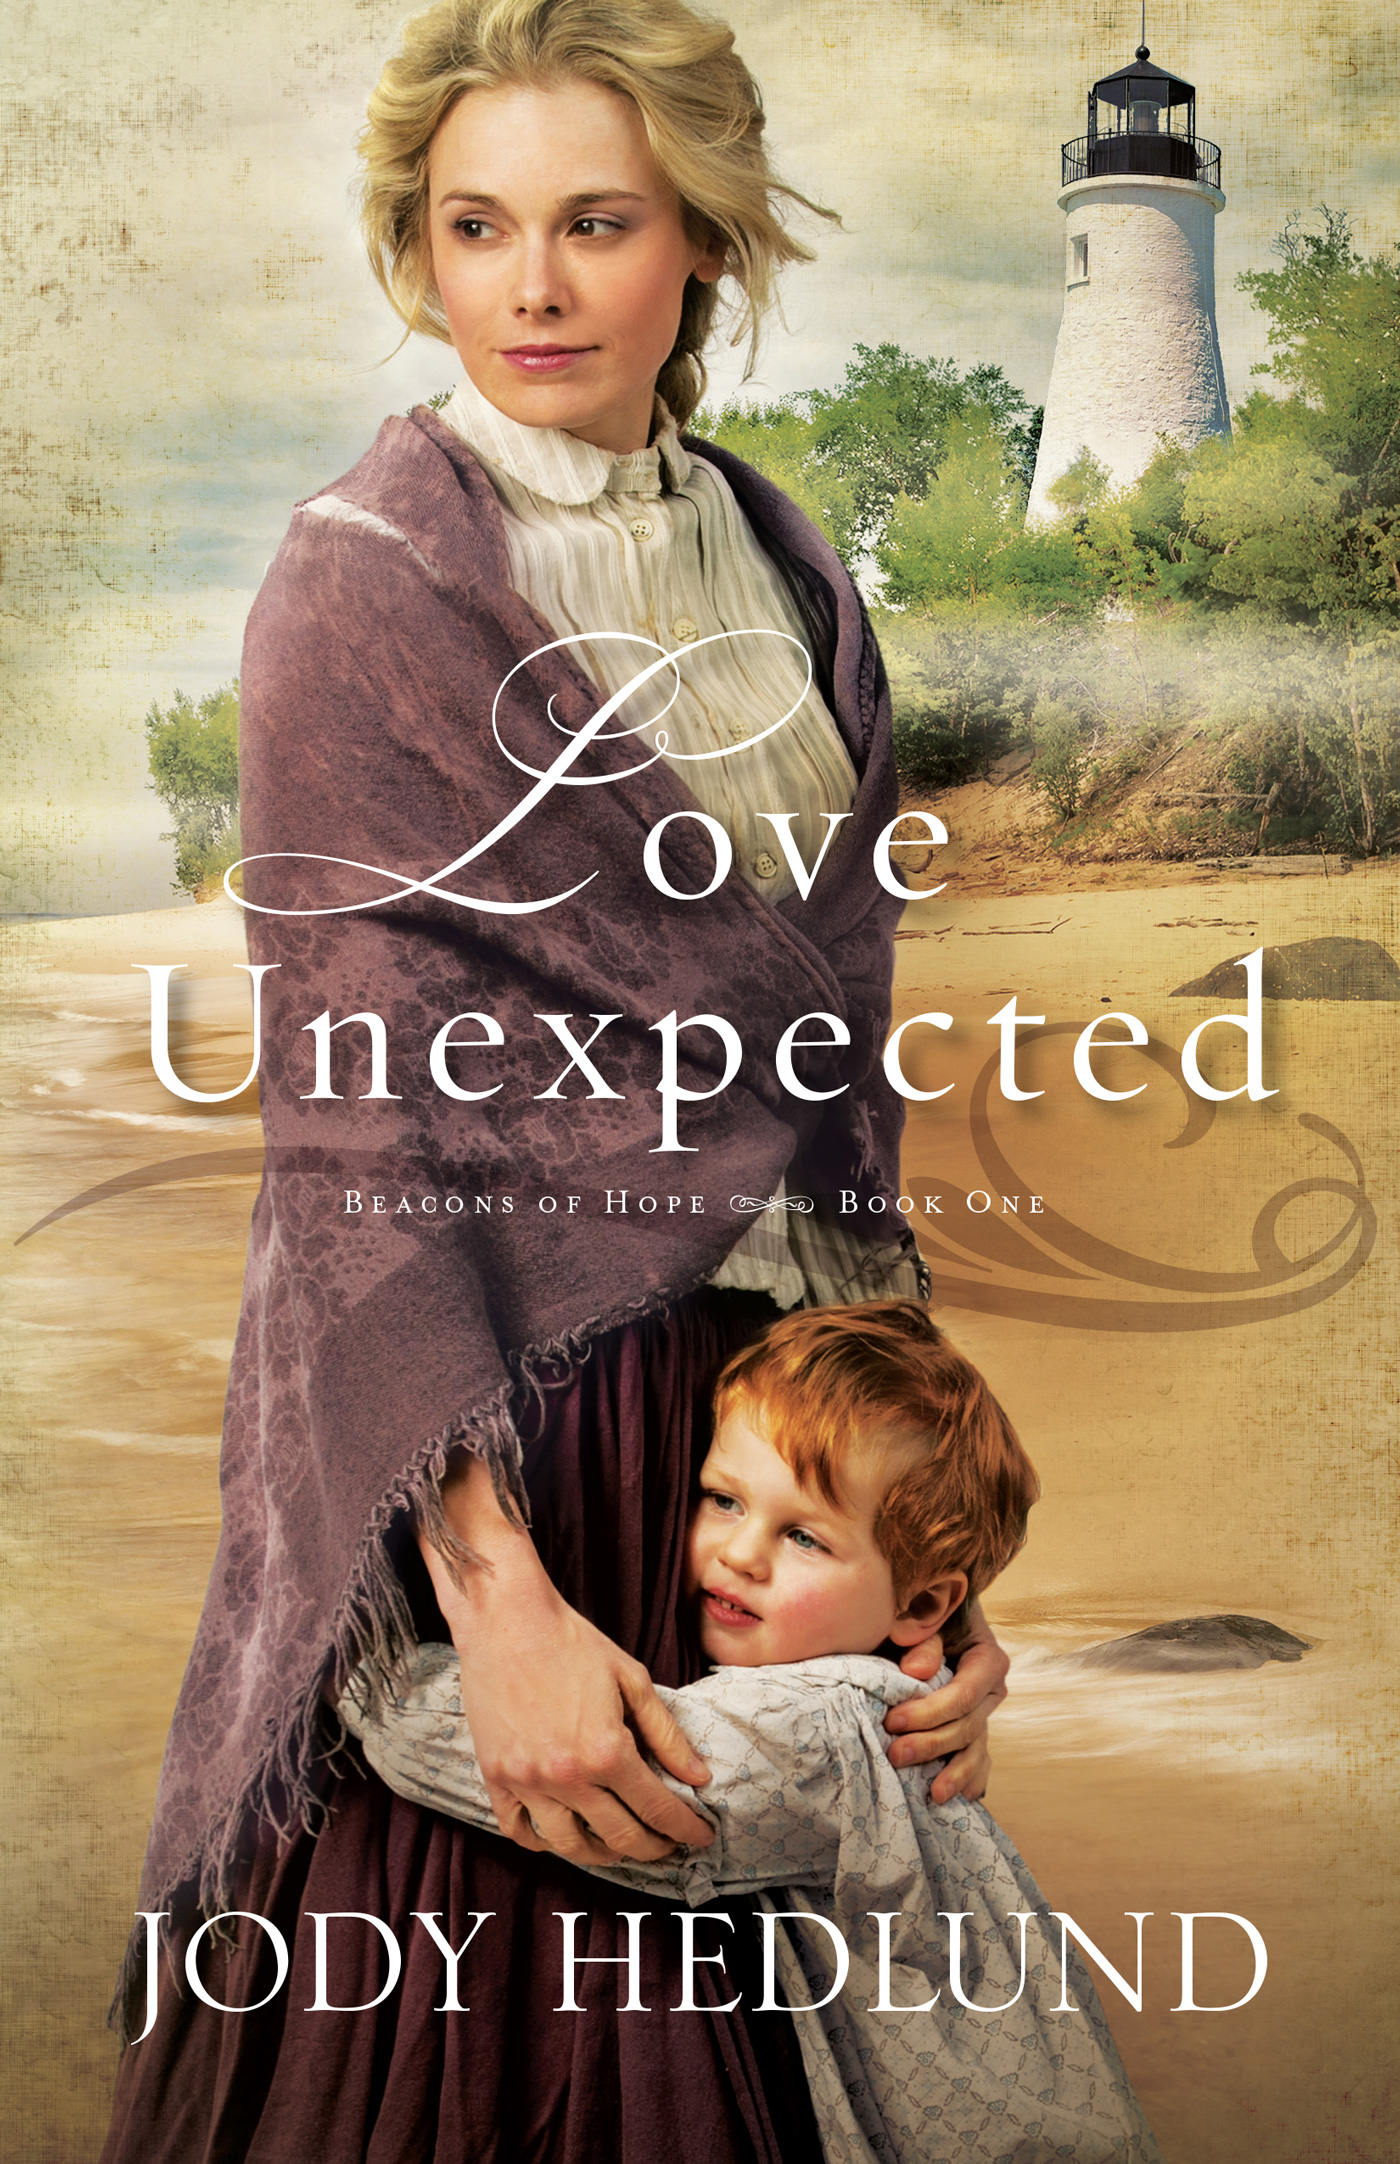 Love Unexpected (2014) by Jody Hedlund